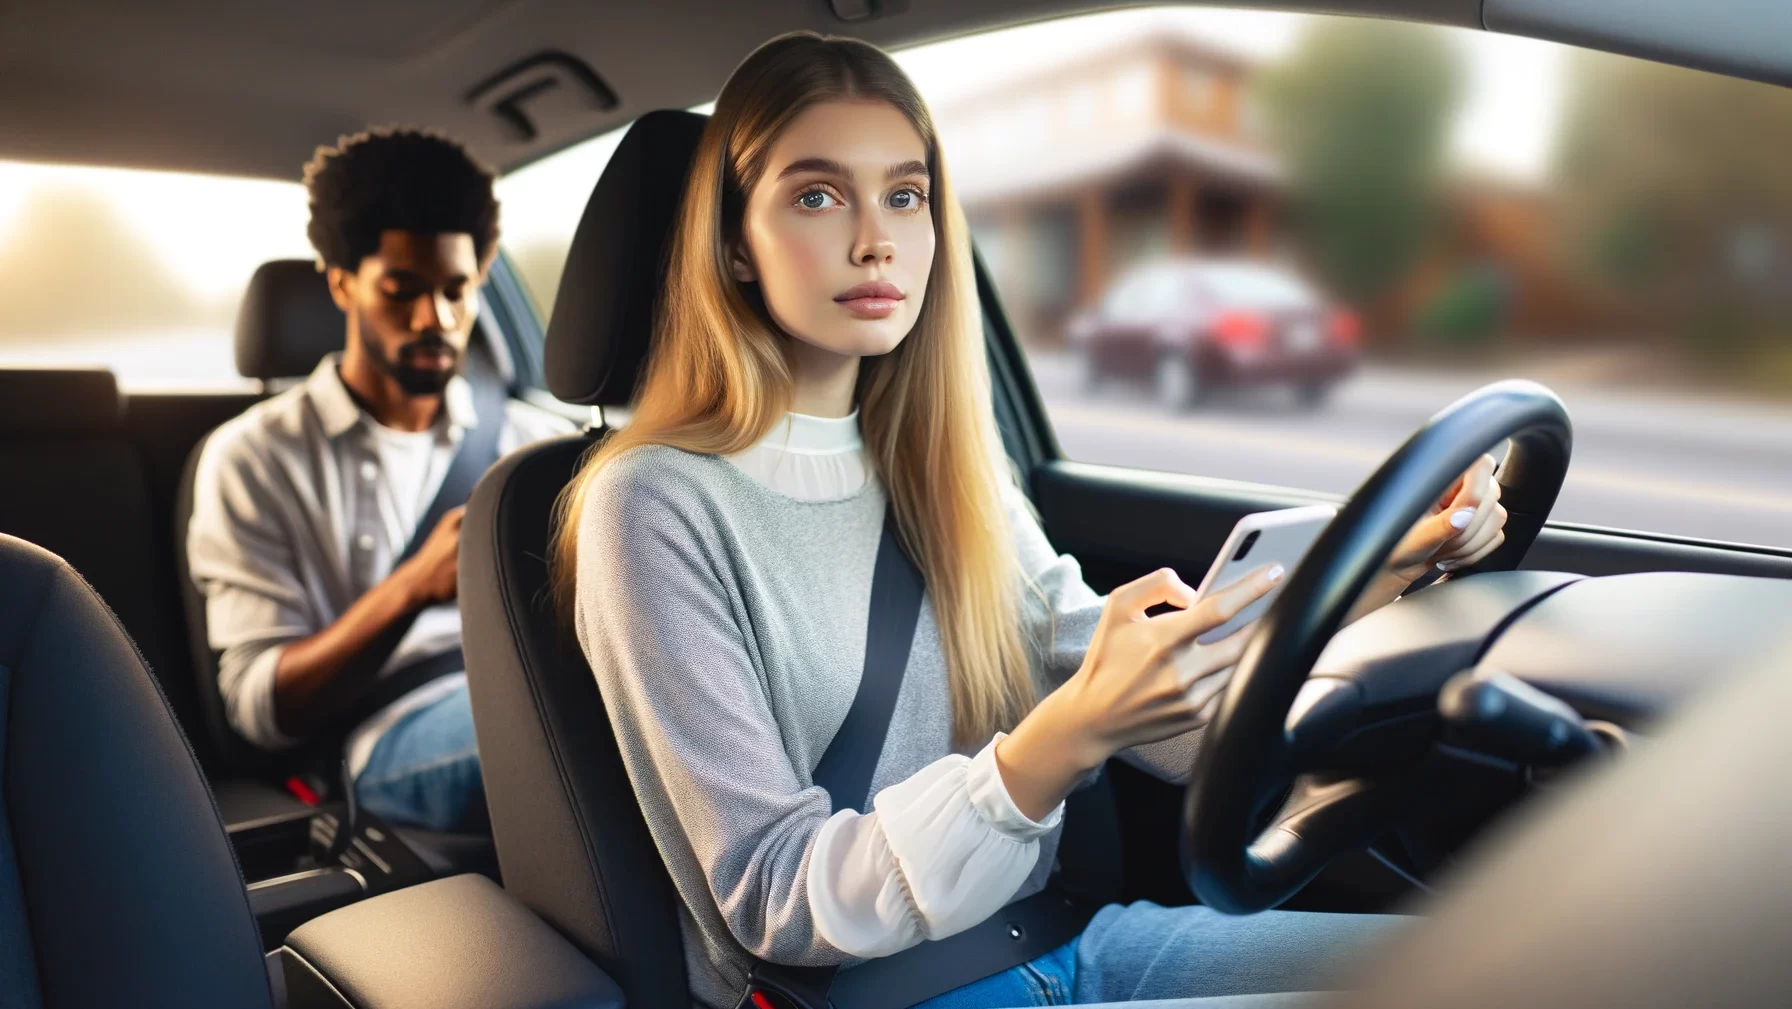 Photo of young woman texting and driving, distracted driving.